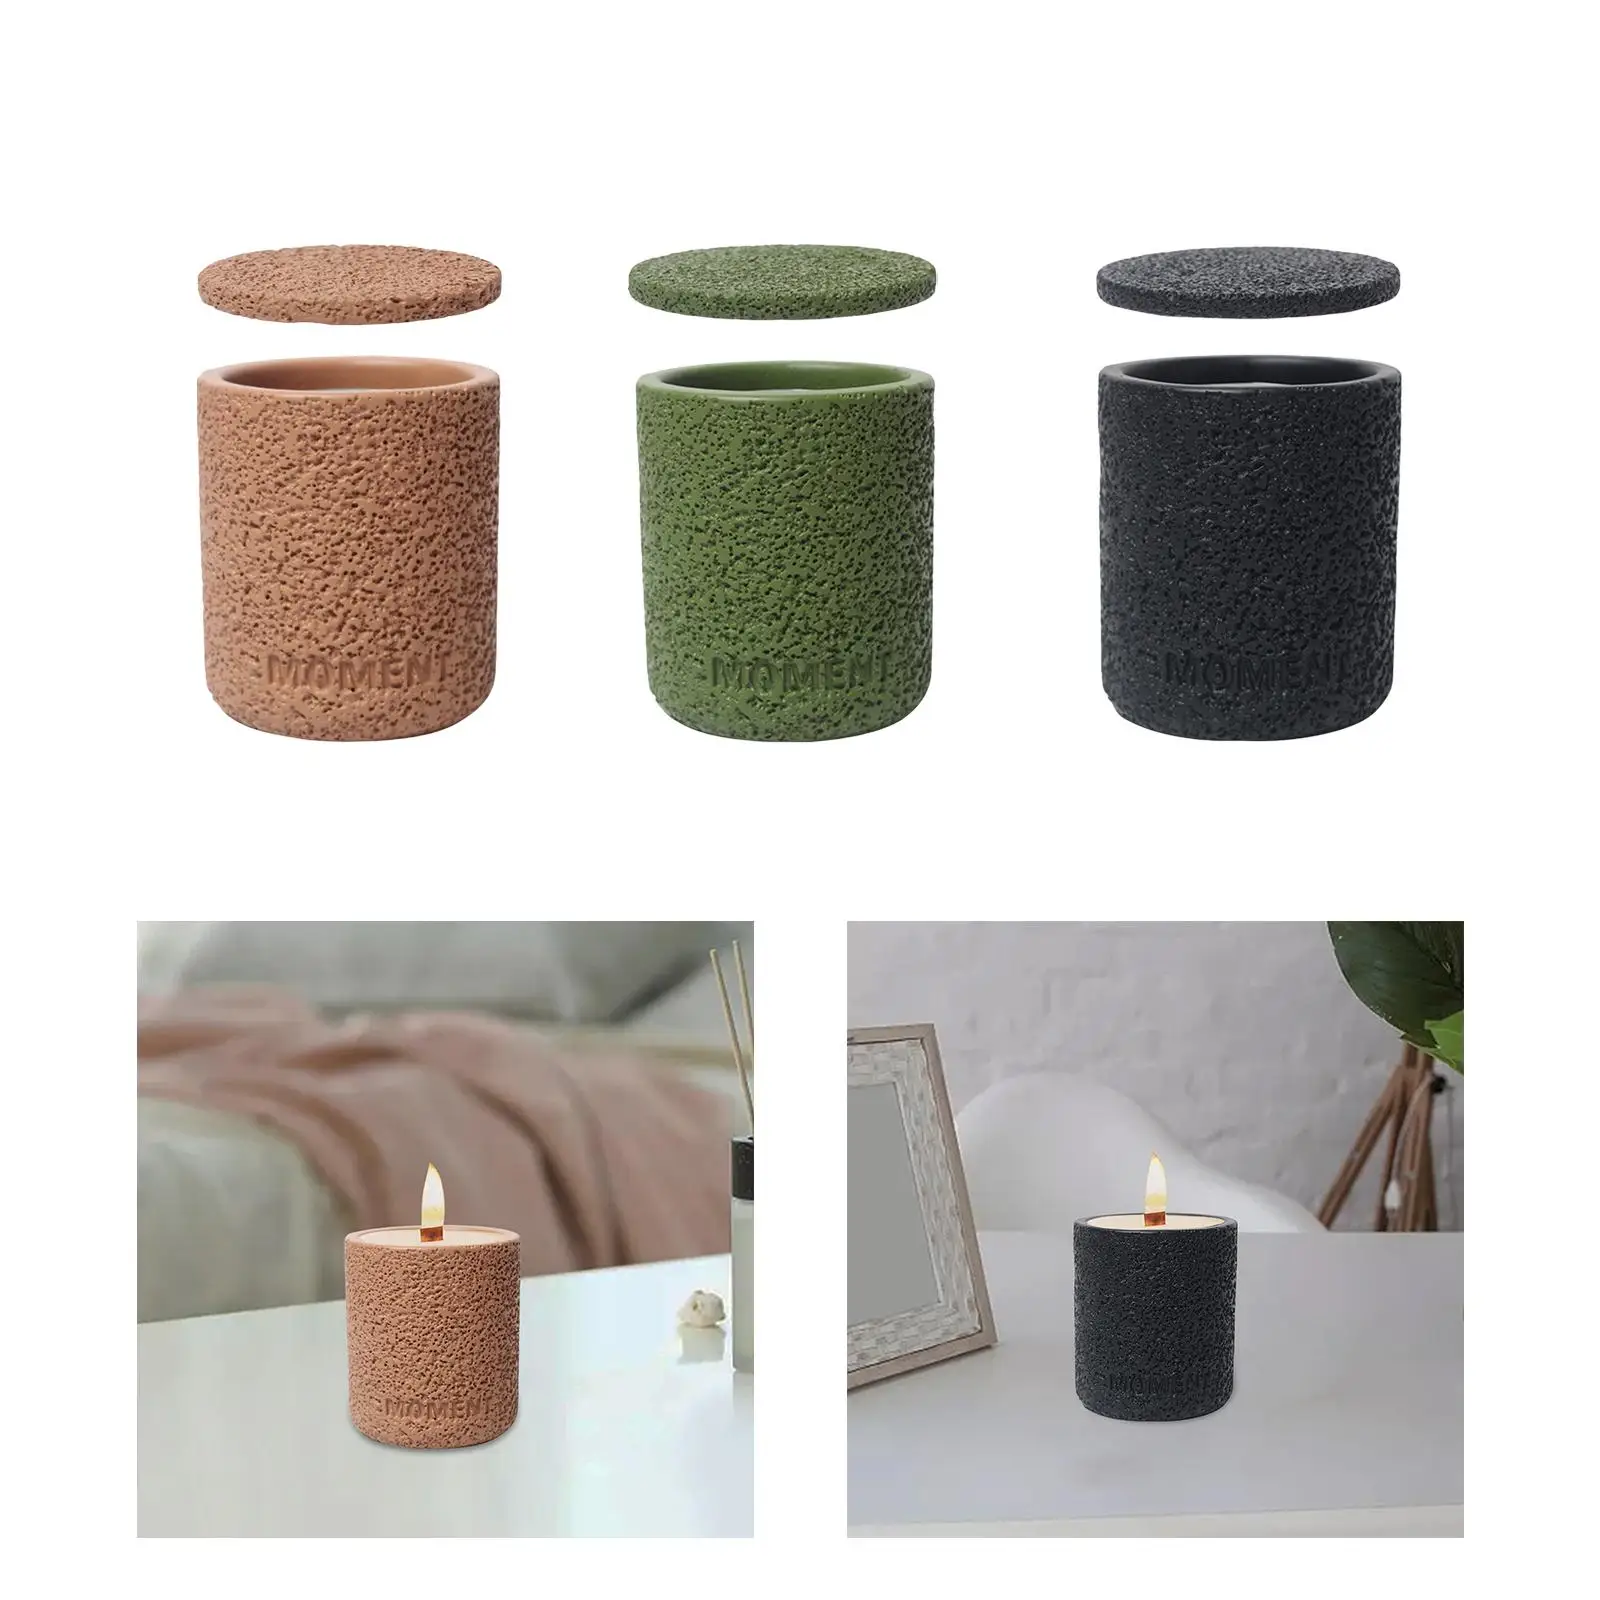 Candle Holders for Tea Lights Candle DIY Candles Small Votive Candle Holders images - 6